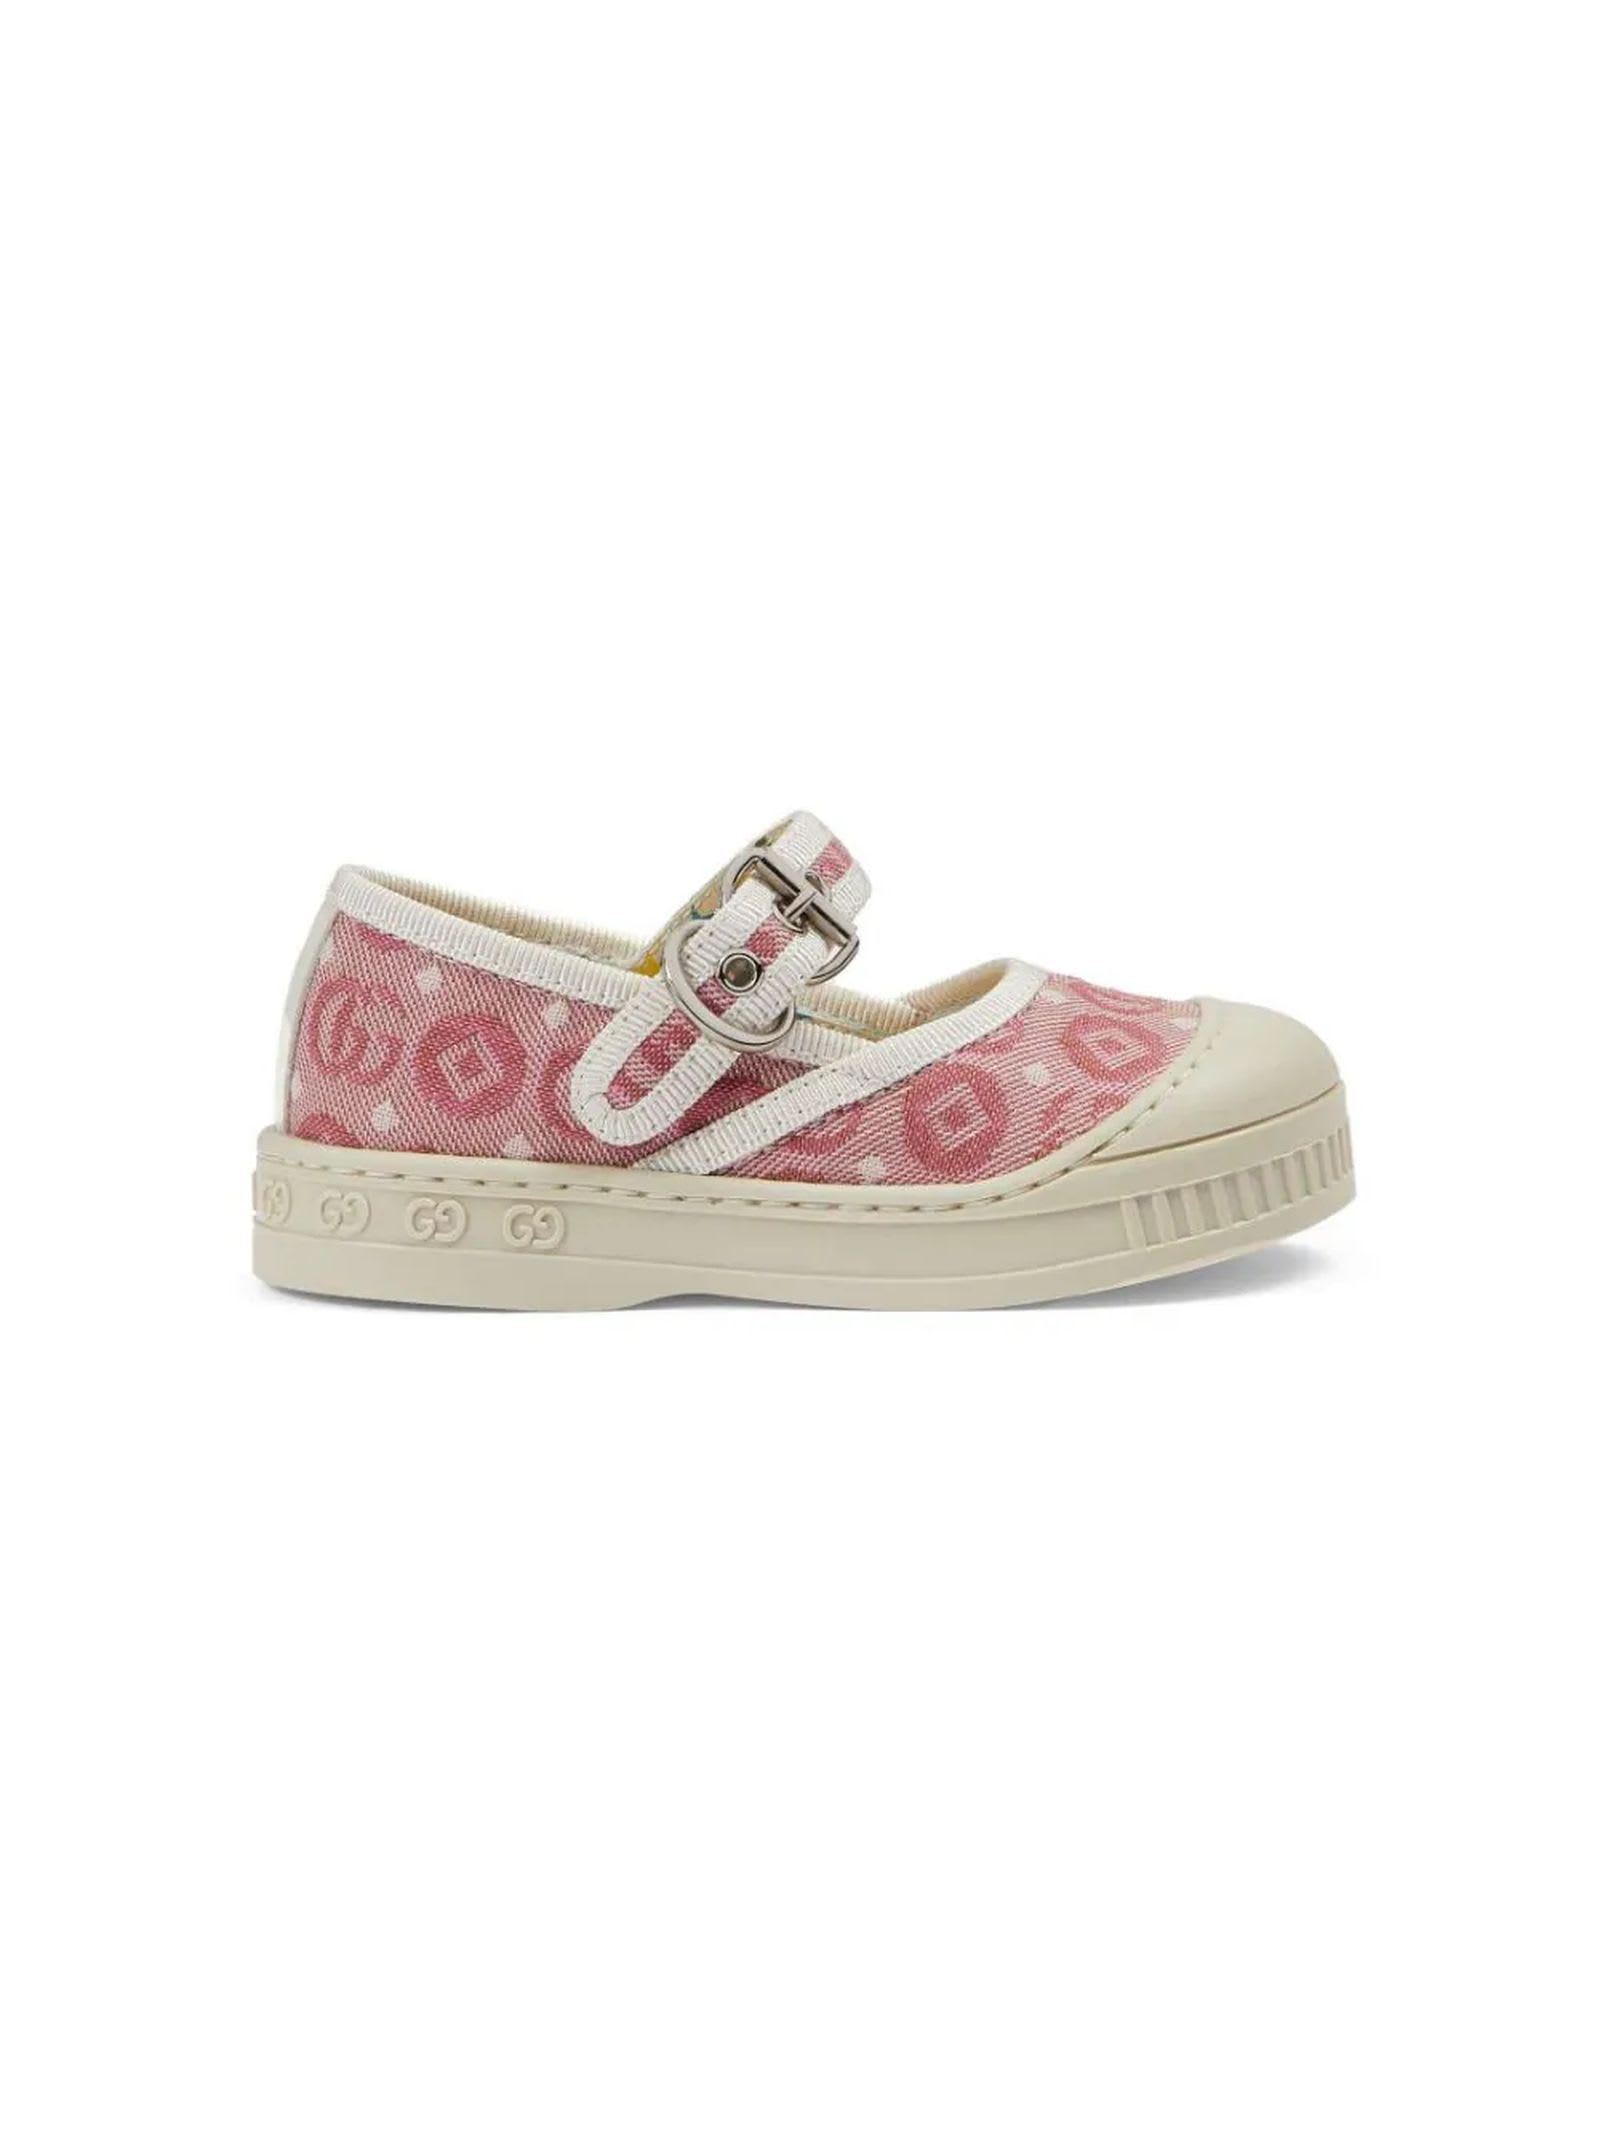 GUCCI TODDLER DOUBLE G BALLET FLAT